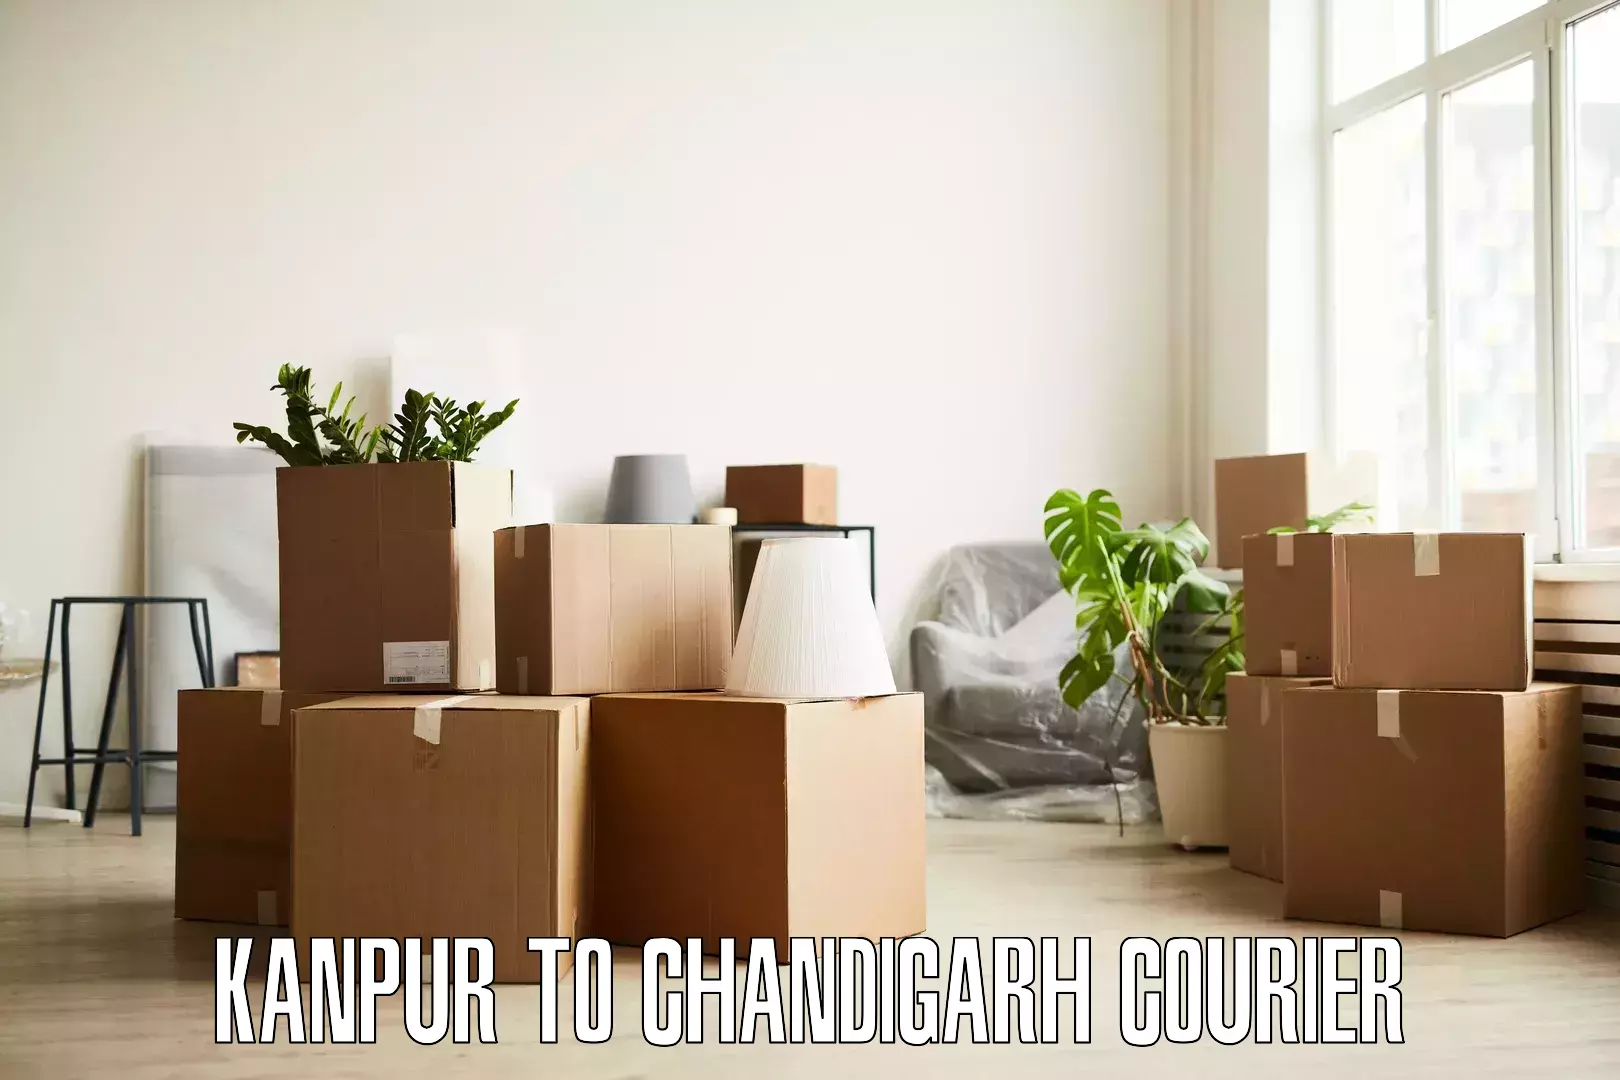 Moving and packing experts Kanpur to Chandigarh